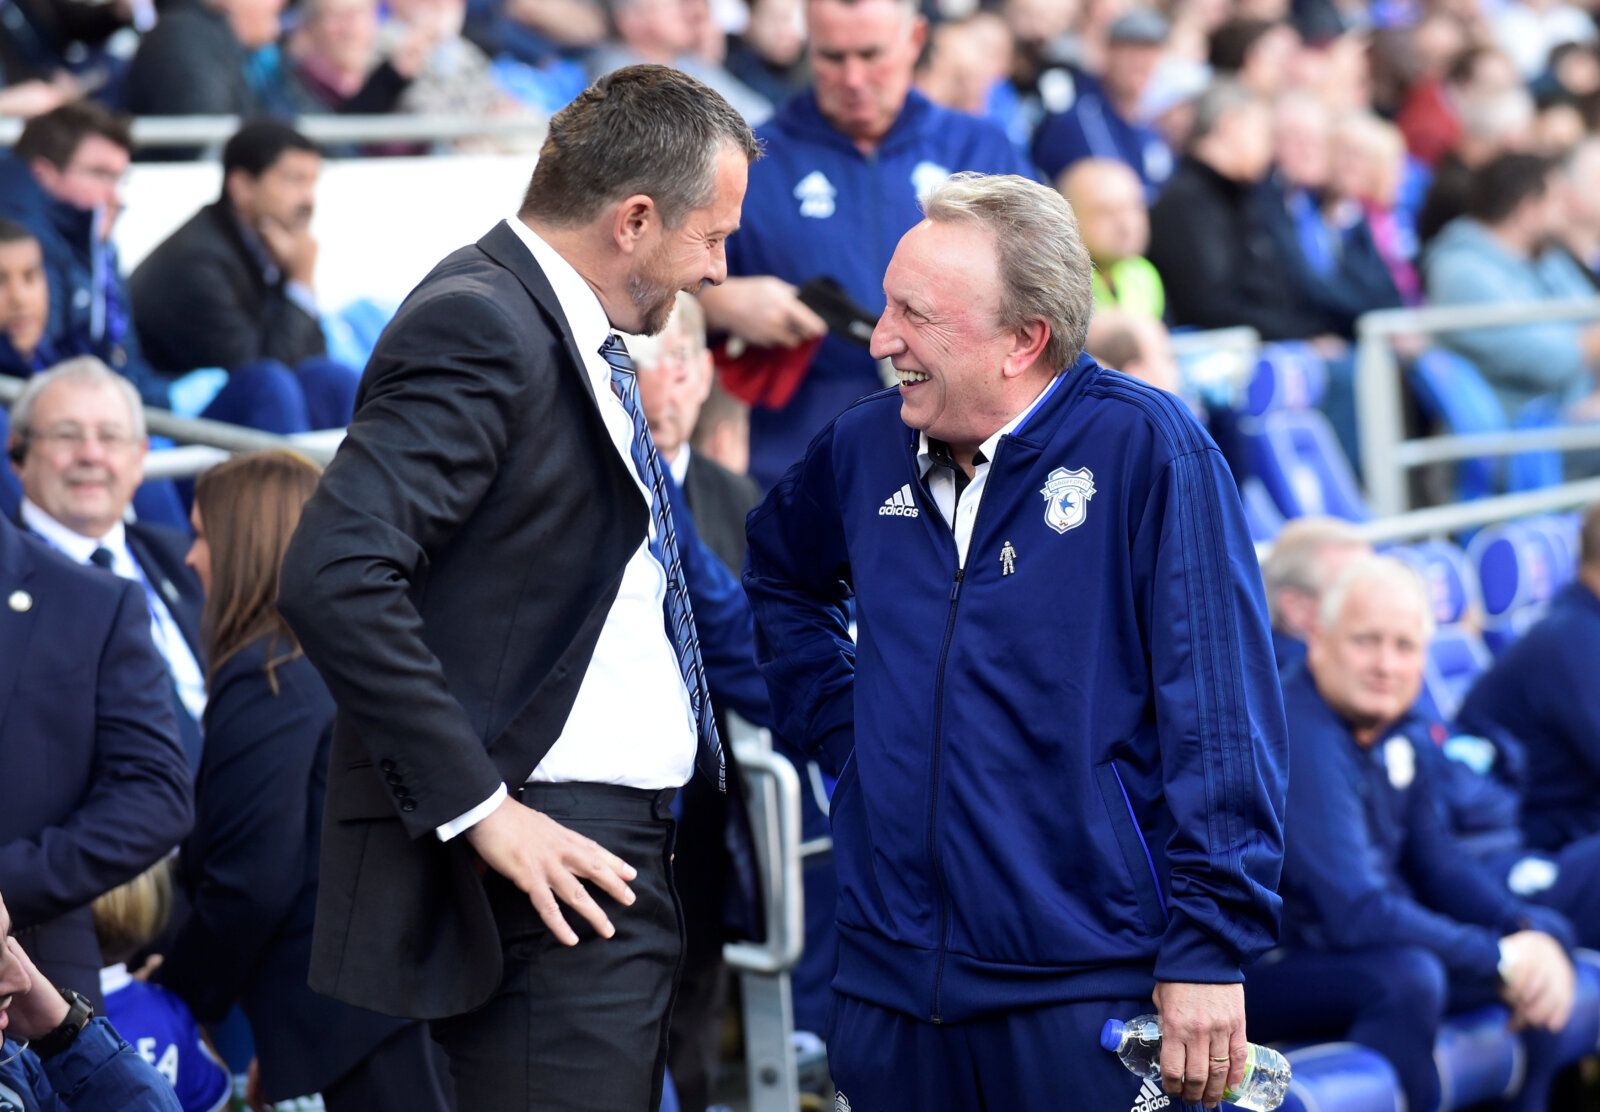 Soccer Football - Premier League - Cardiff City v Fulham - Cardiff City Stadium, Cardiff, Britain - October 20, 2018  Fulham manager Slavisa Jokanovic with Cardiff City manager Neil Warnock before the match    REUTERS/Rebecca Naden  EDITORIAL USE ONLY. No use with unauthorized audio, video, data, fixture lists, club/league logos or 